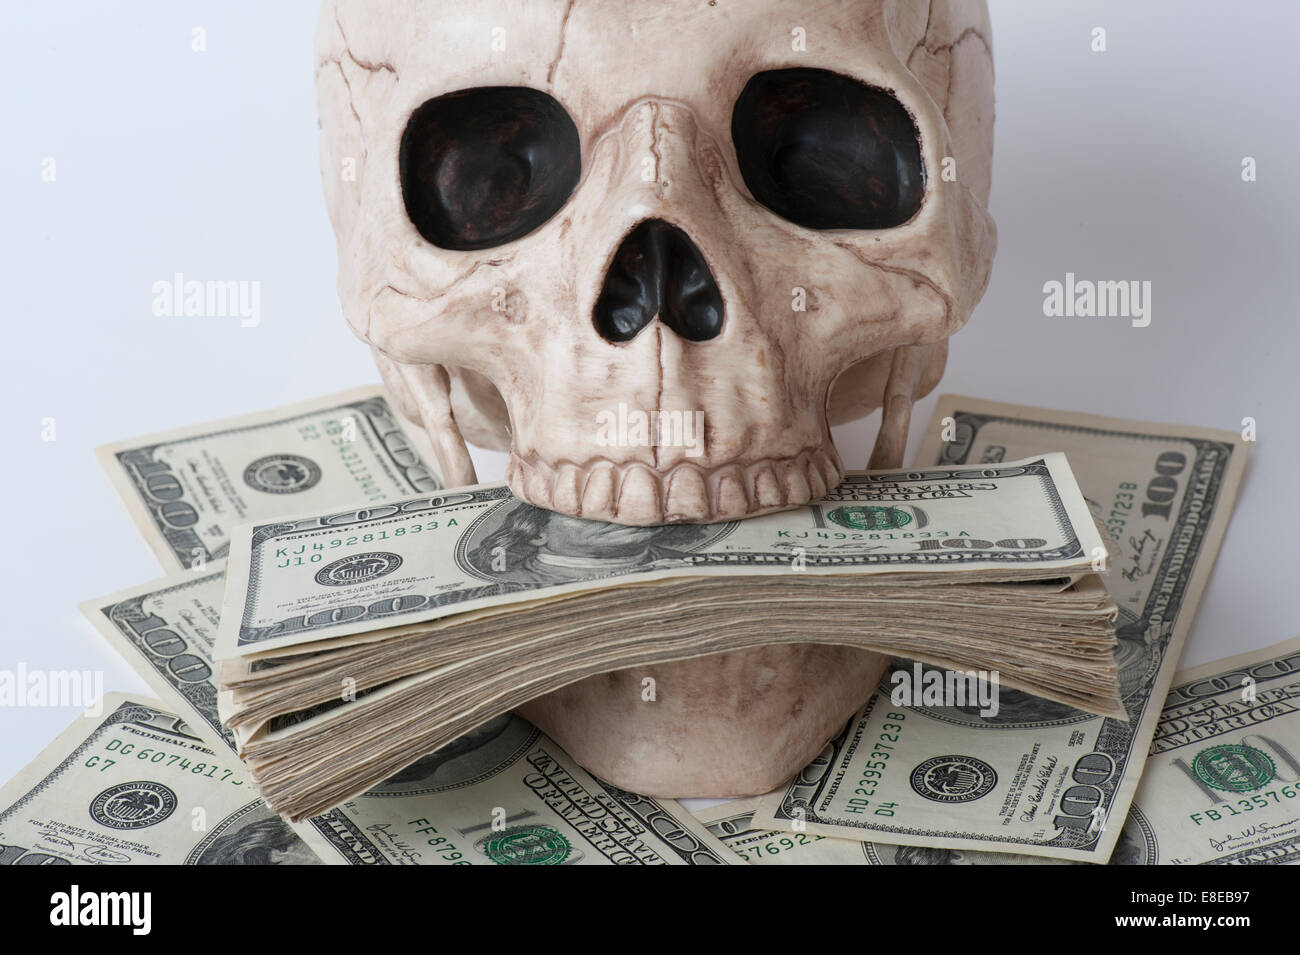 Human skull surrounded by stacks of one hundred dollar bills concept greed Stock Photo